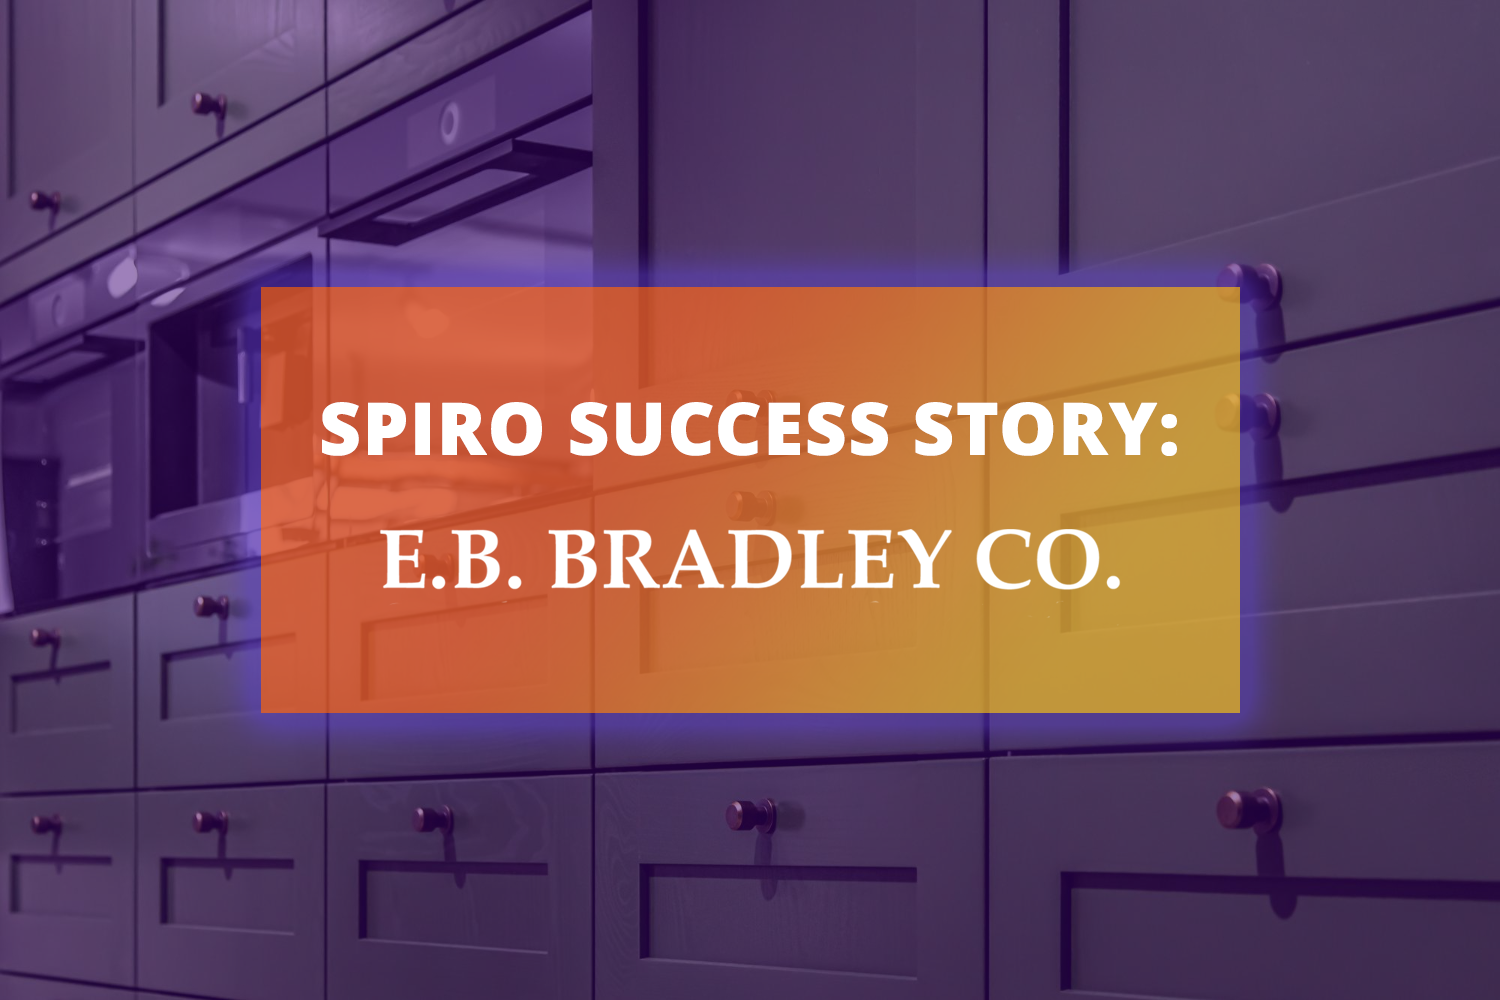 The E.B. Bradley Co. Accelerates Sales with Data-Based Insights